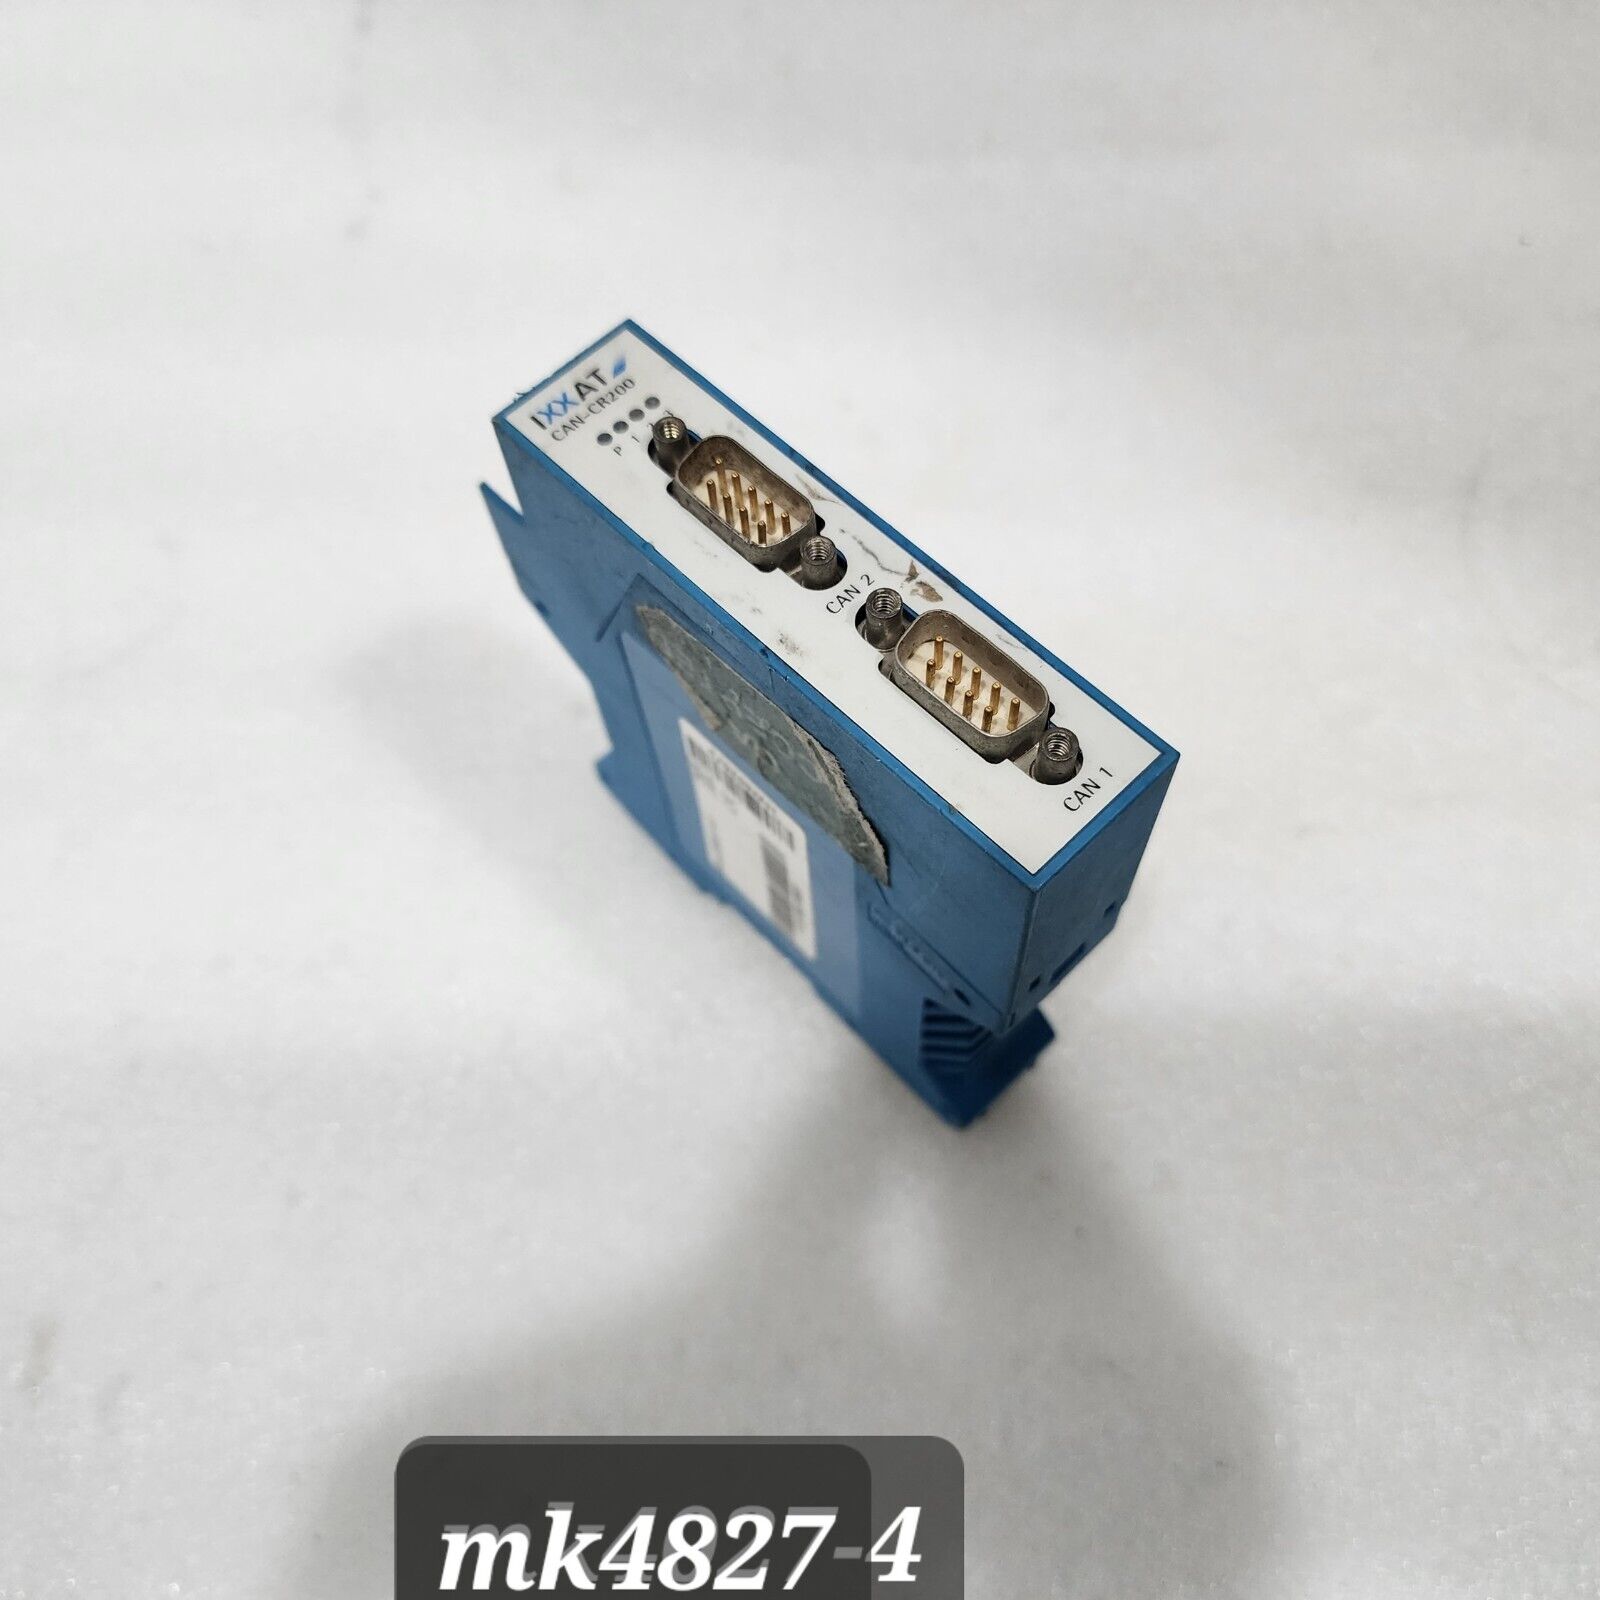 IXXAT CAN-CR200 CAN REPEATER V1.2